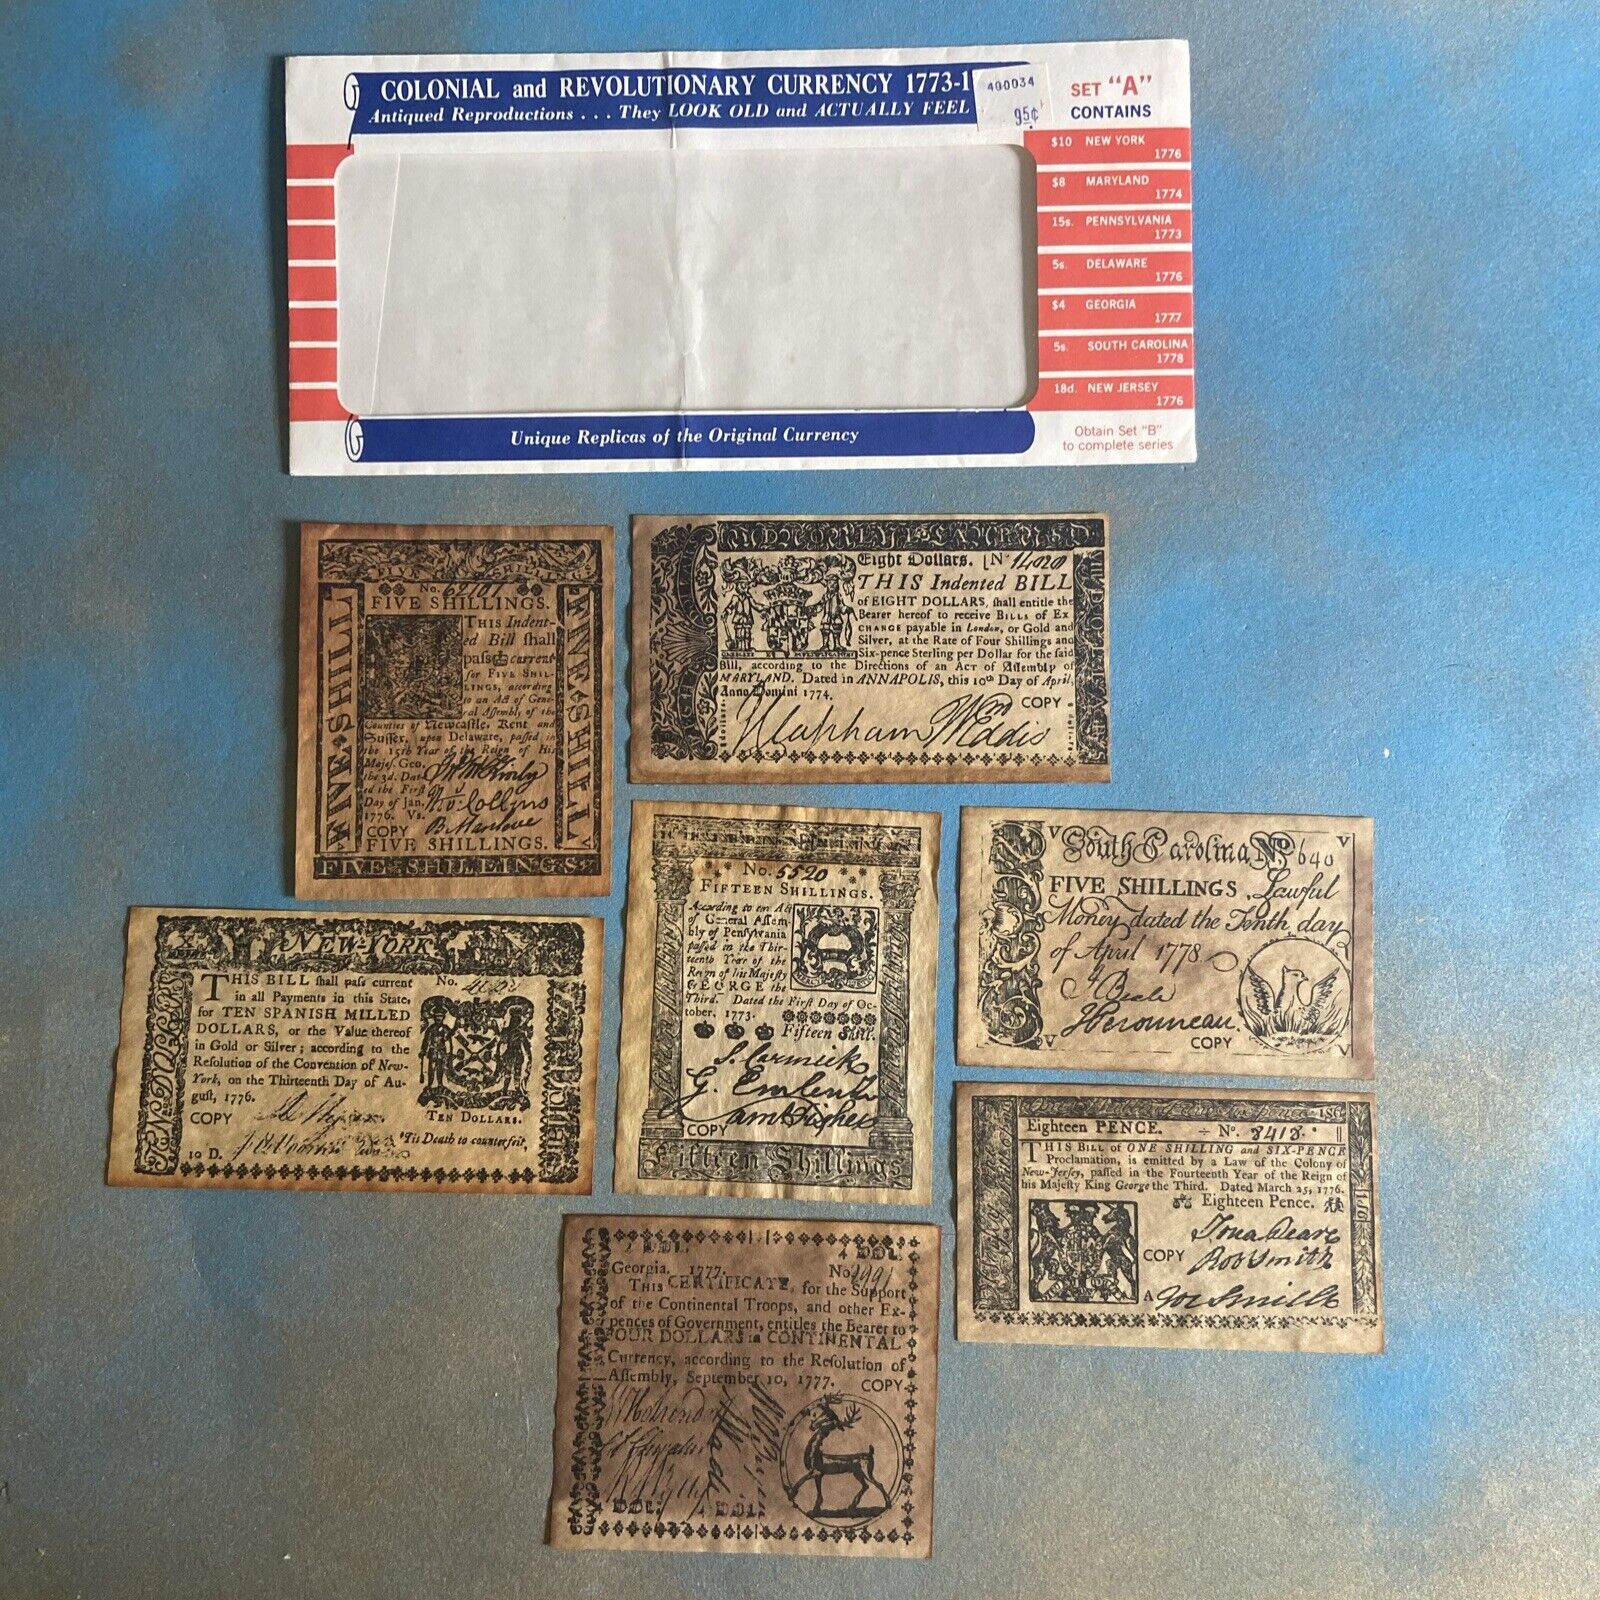 Colonial and Revolutionary Currency - set “A” Vintage Reproductions 1773 - 1781